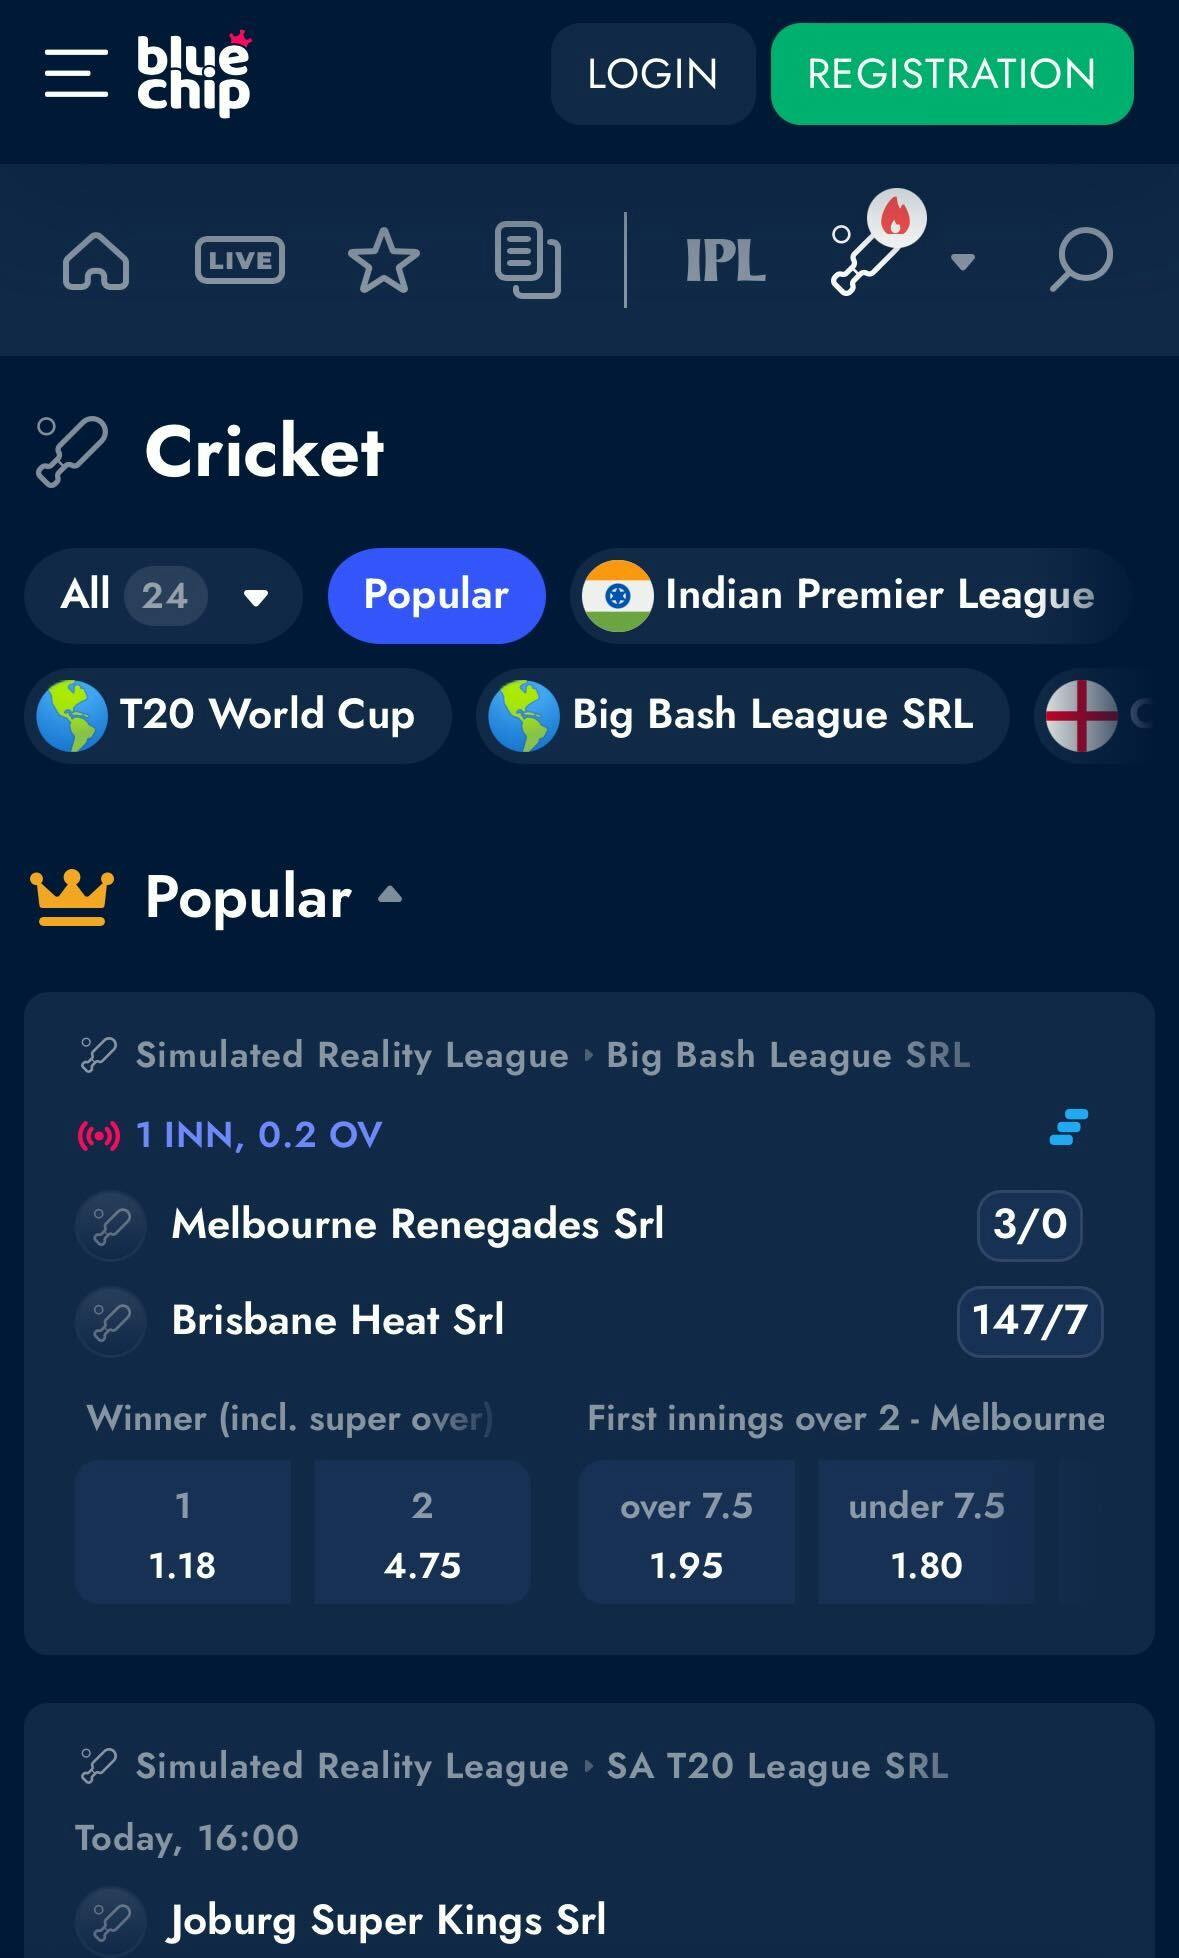 BlueChip cricket pre-match betting options in India